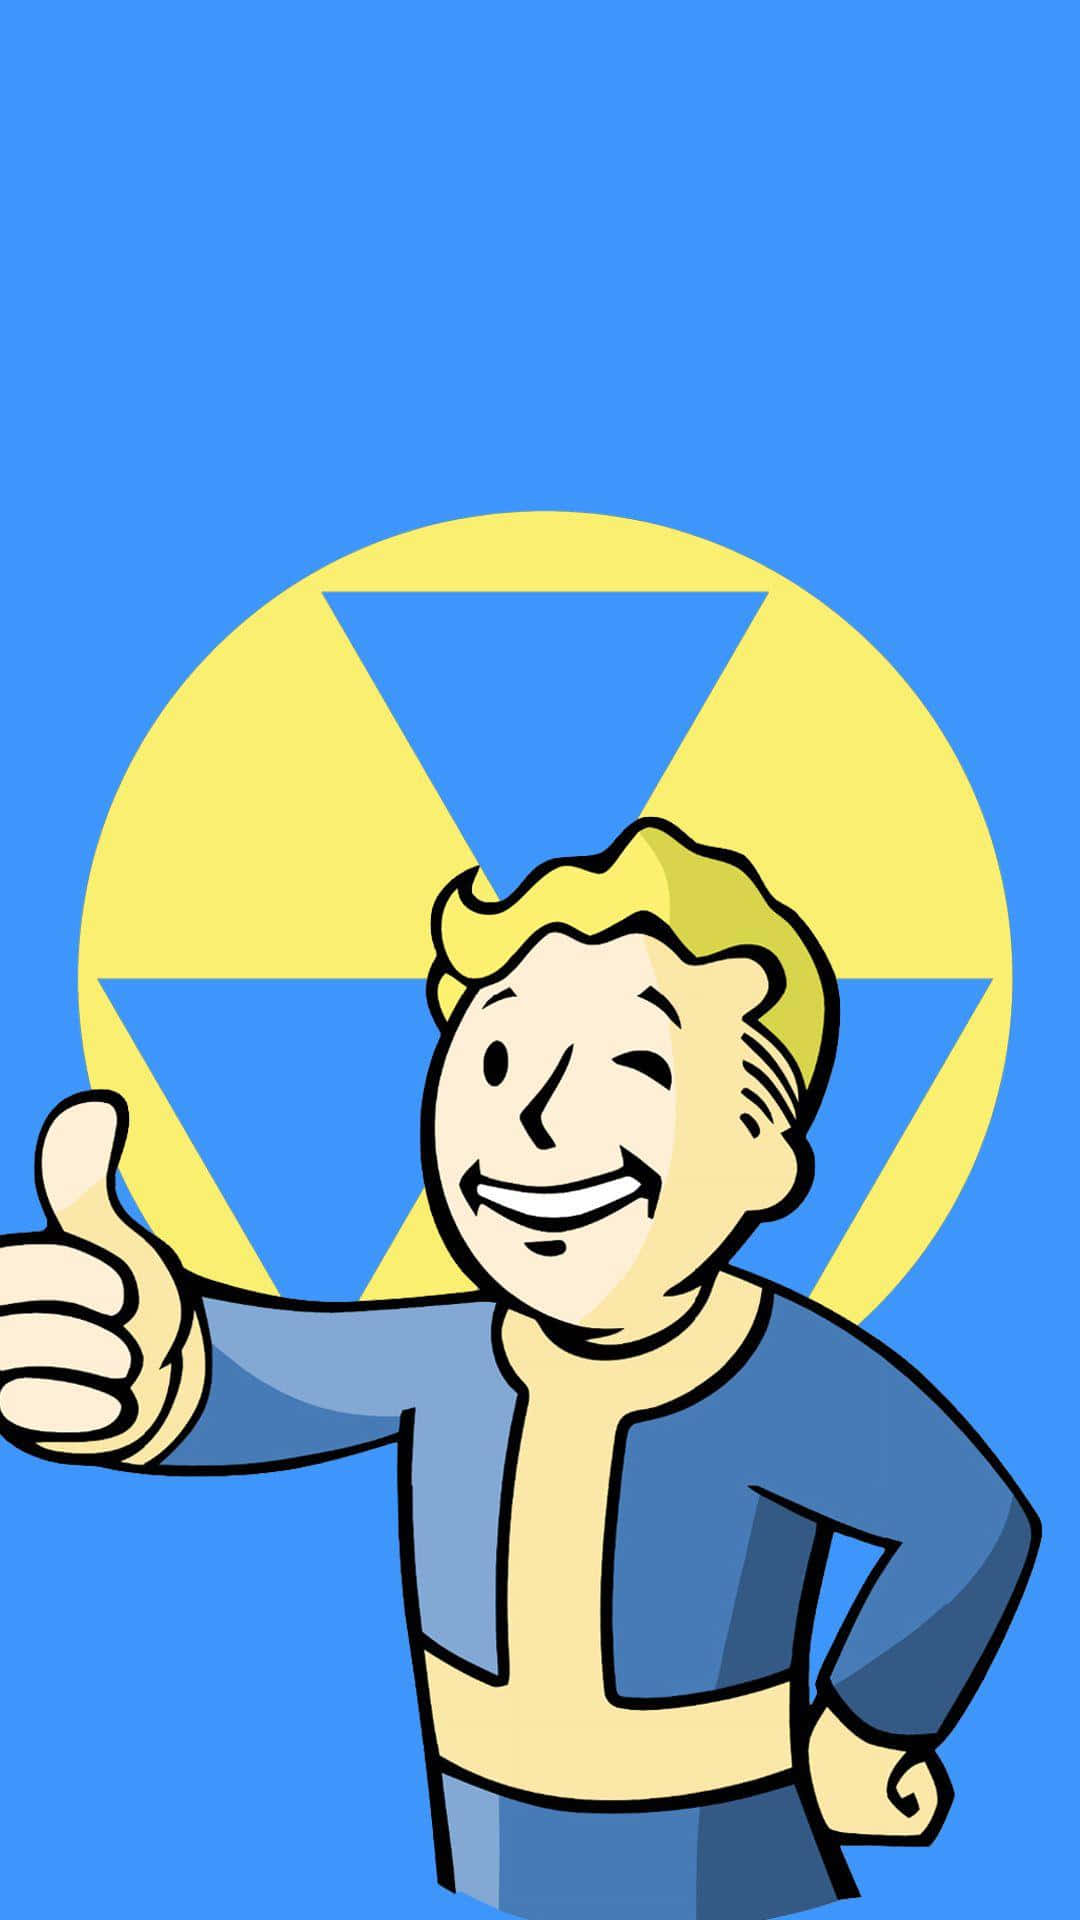 Exciting Fallout Shelter game scene Wallpaper